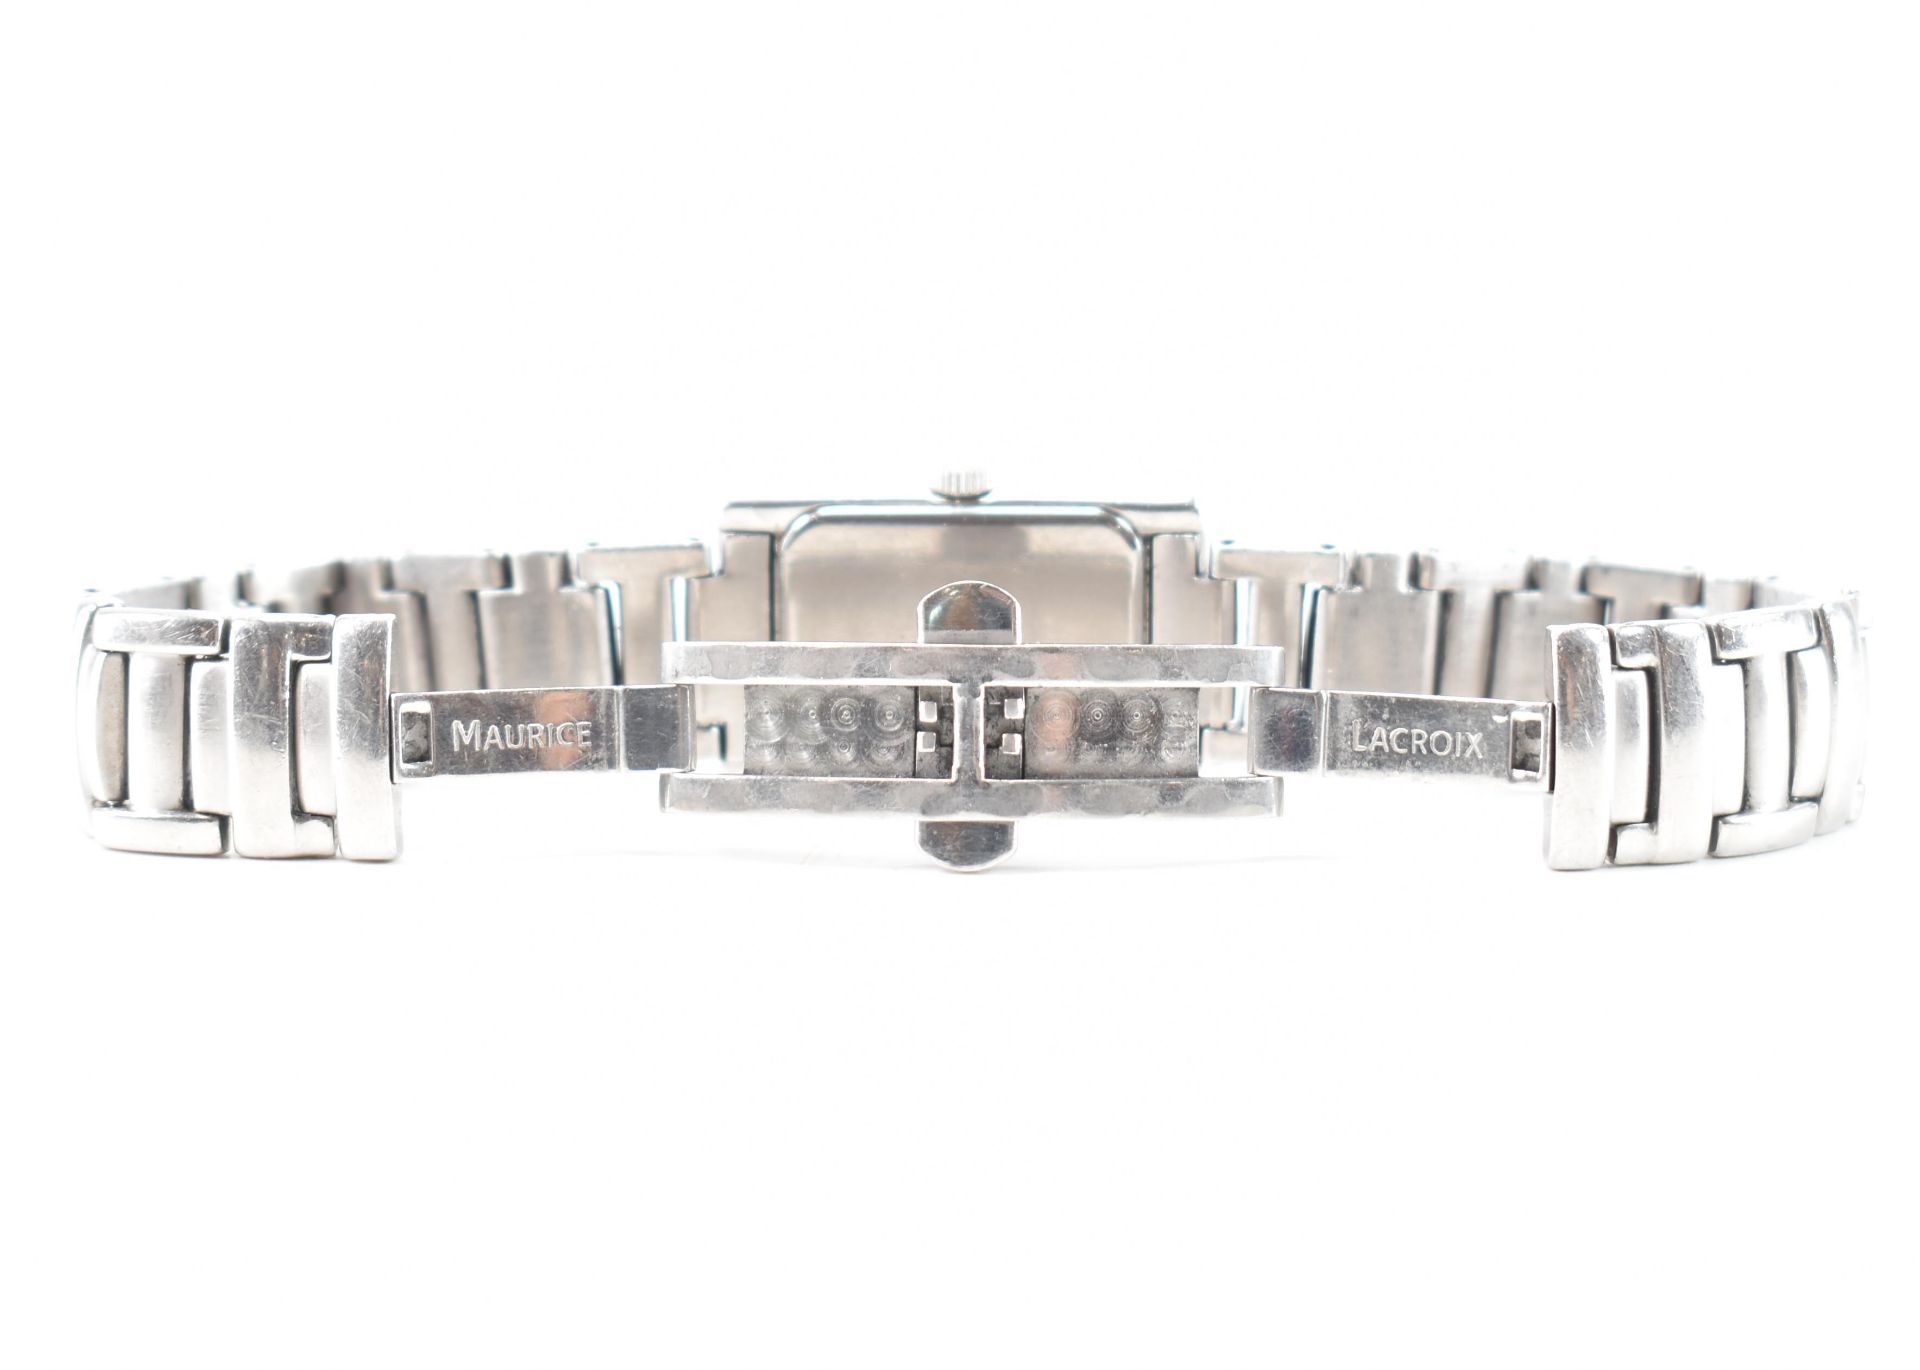 MAURICE LACROIX STAINLESS STEEL SWISS MADE WRIST WATCH - Image 5 of 5